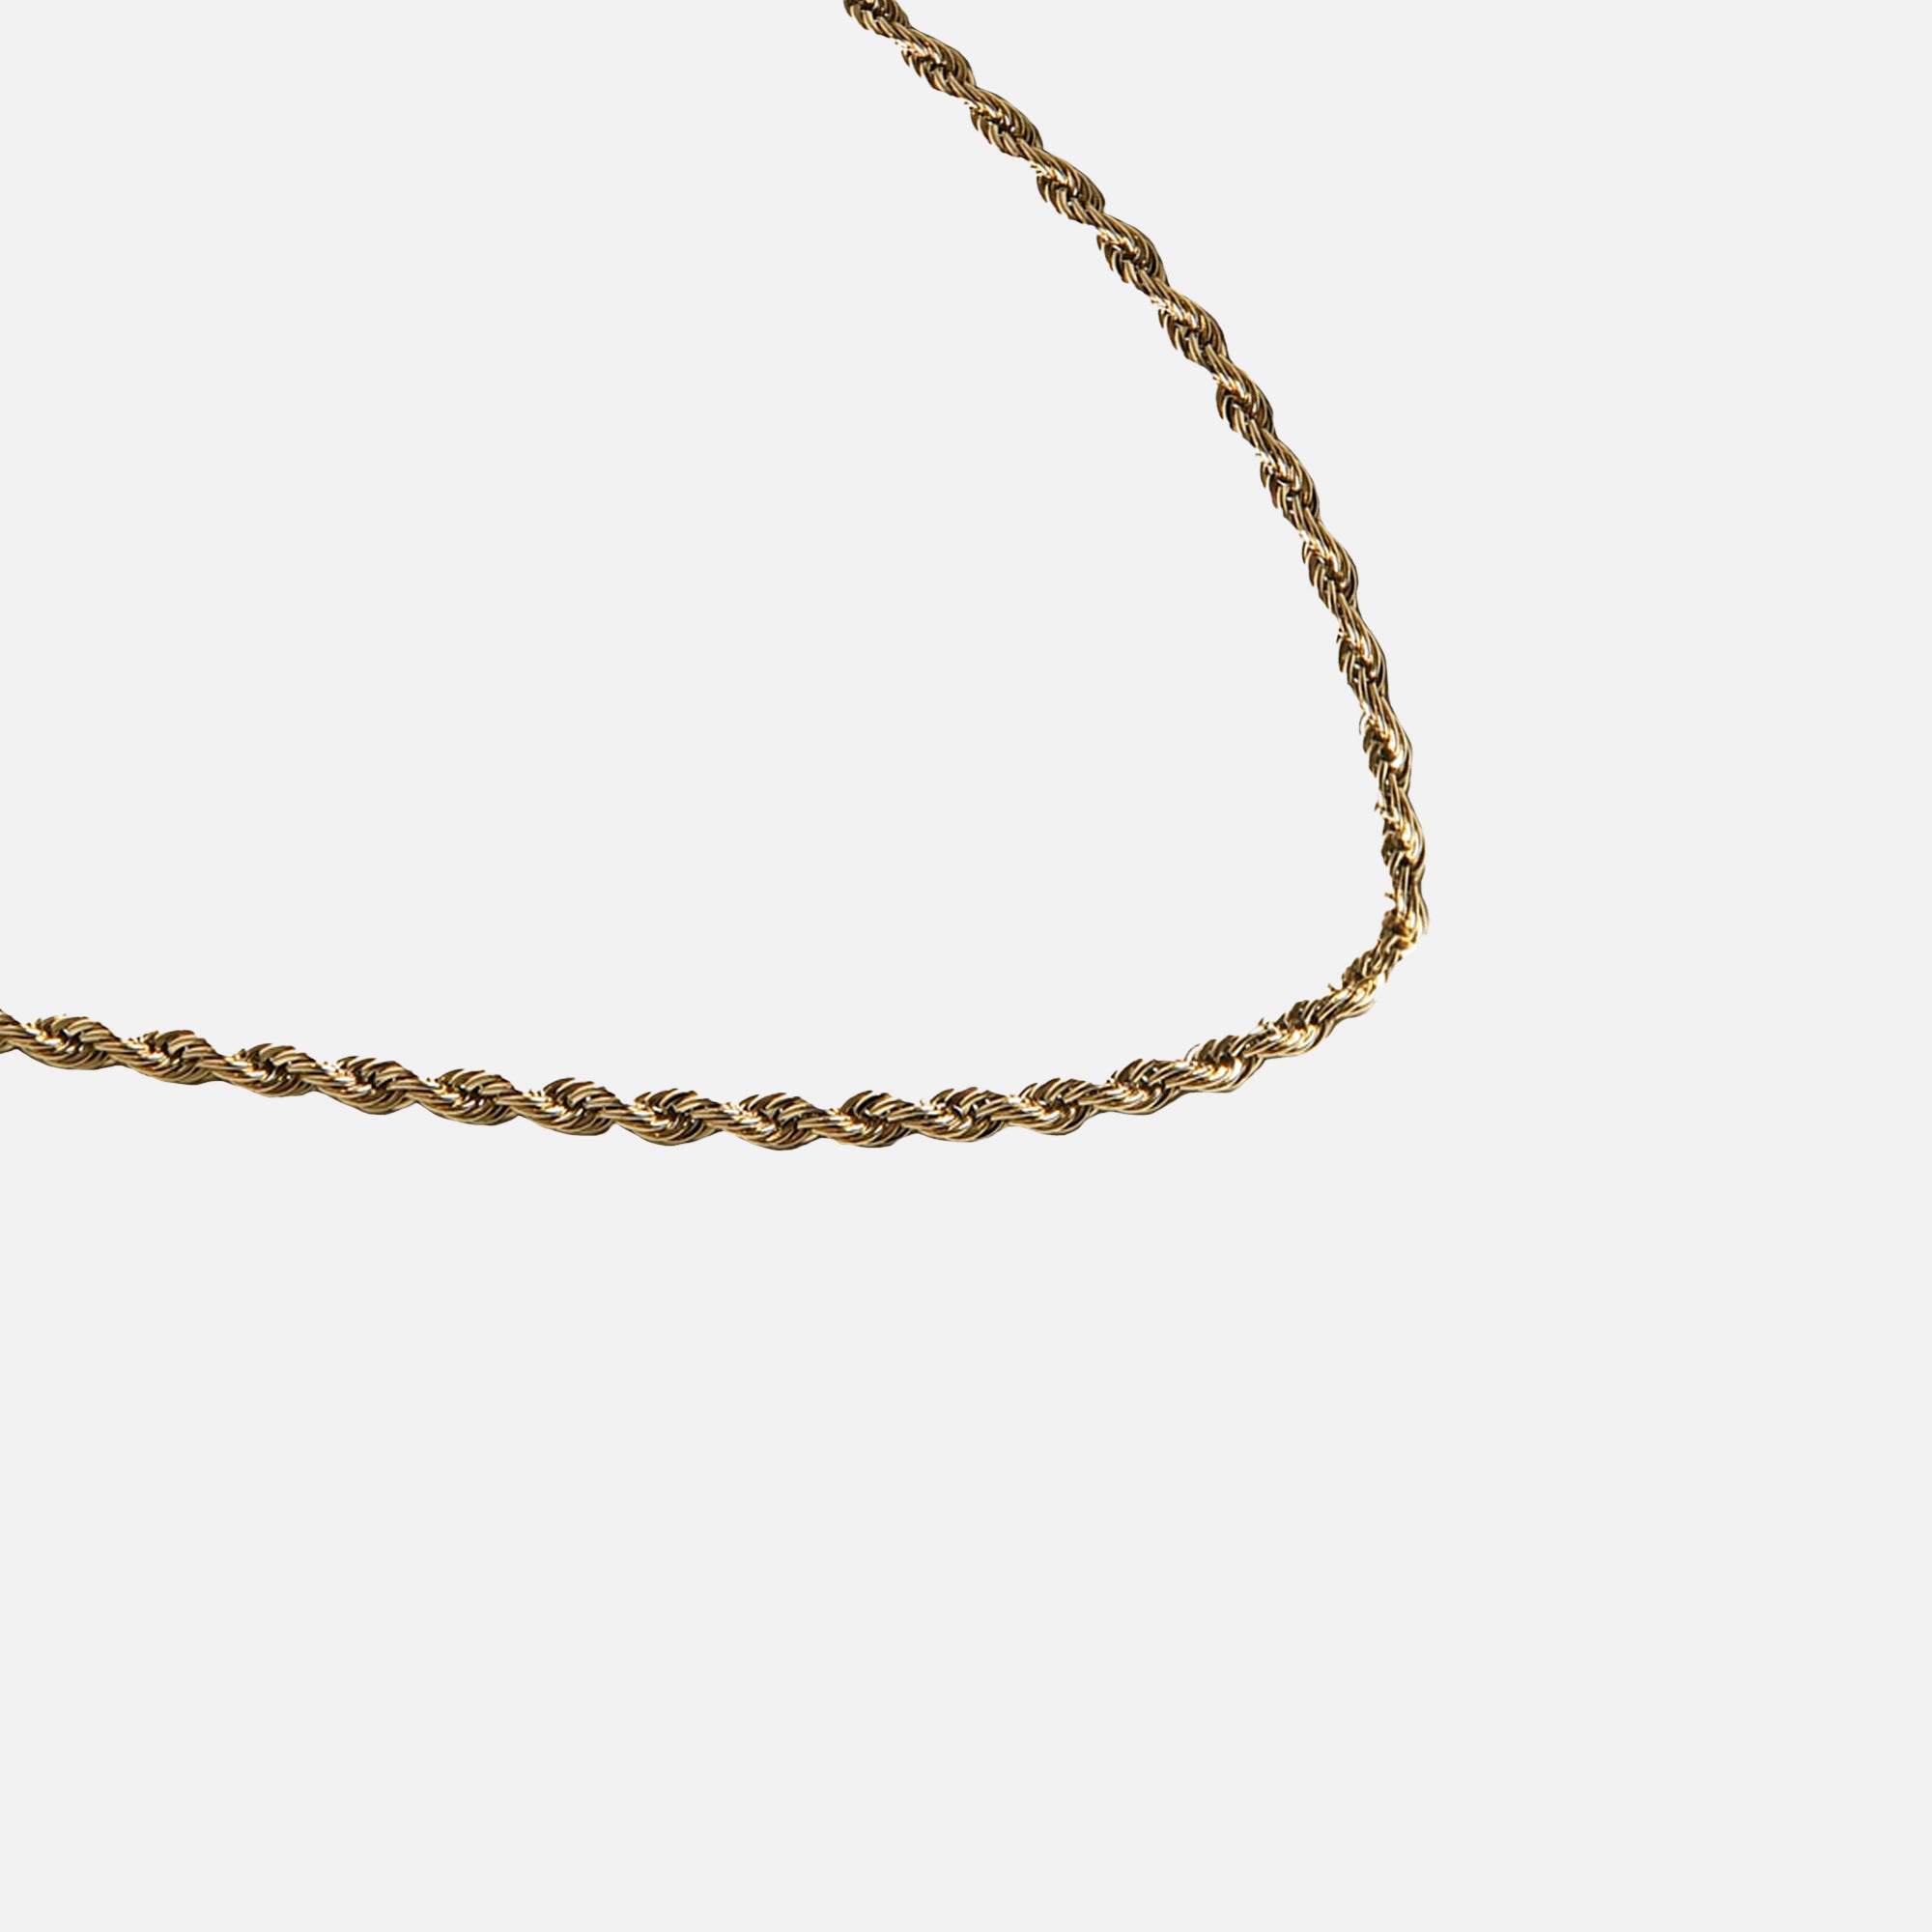 Golden stainless steel twisted chain